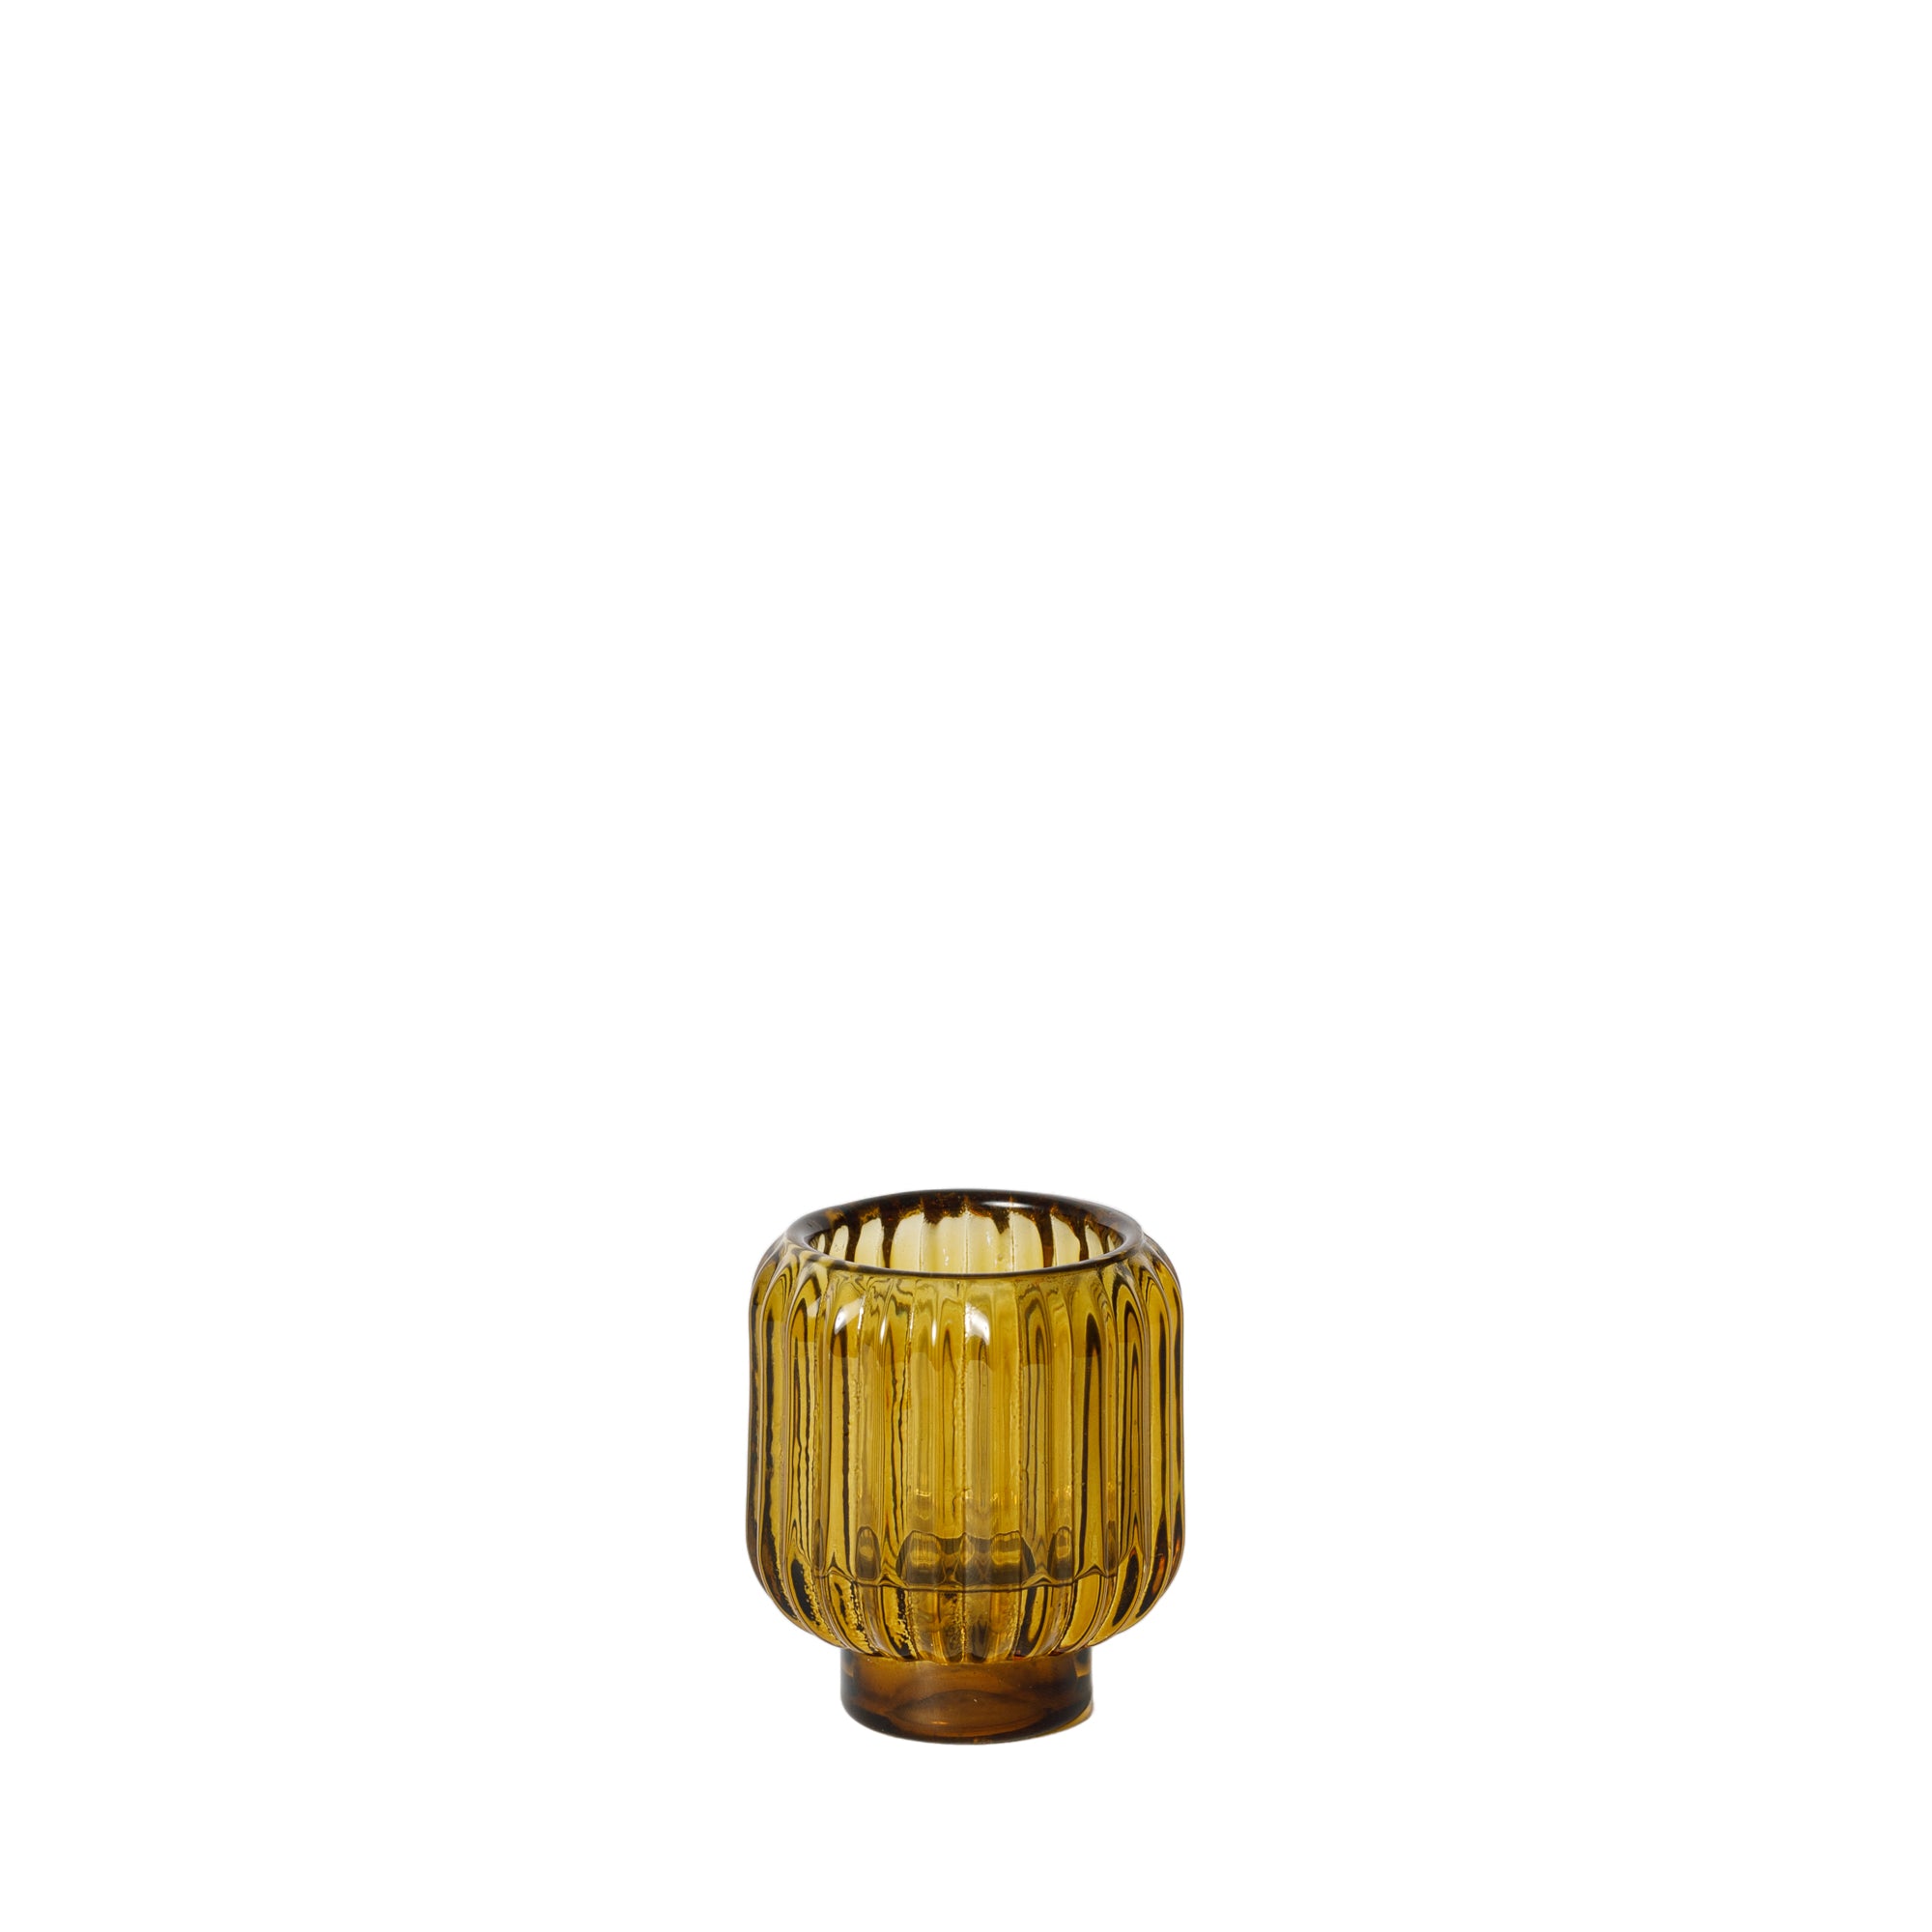 Amber Votive Tealight Candle Holder for Hire | For Love & Living wedding & events hire Gold Coast